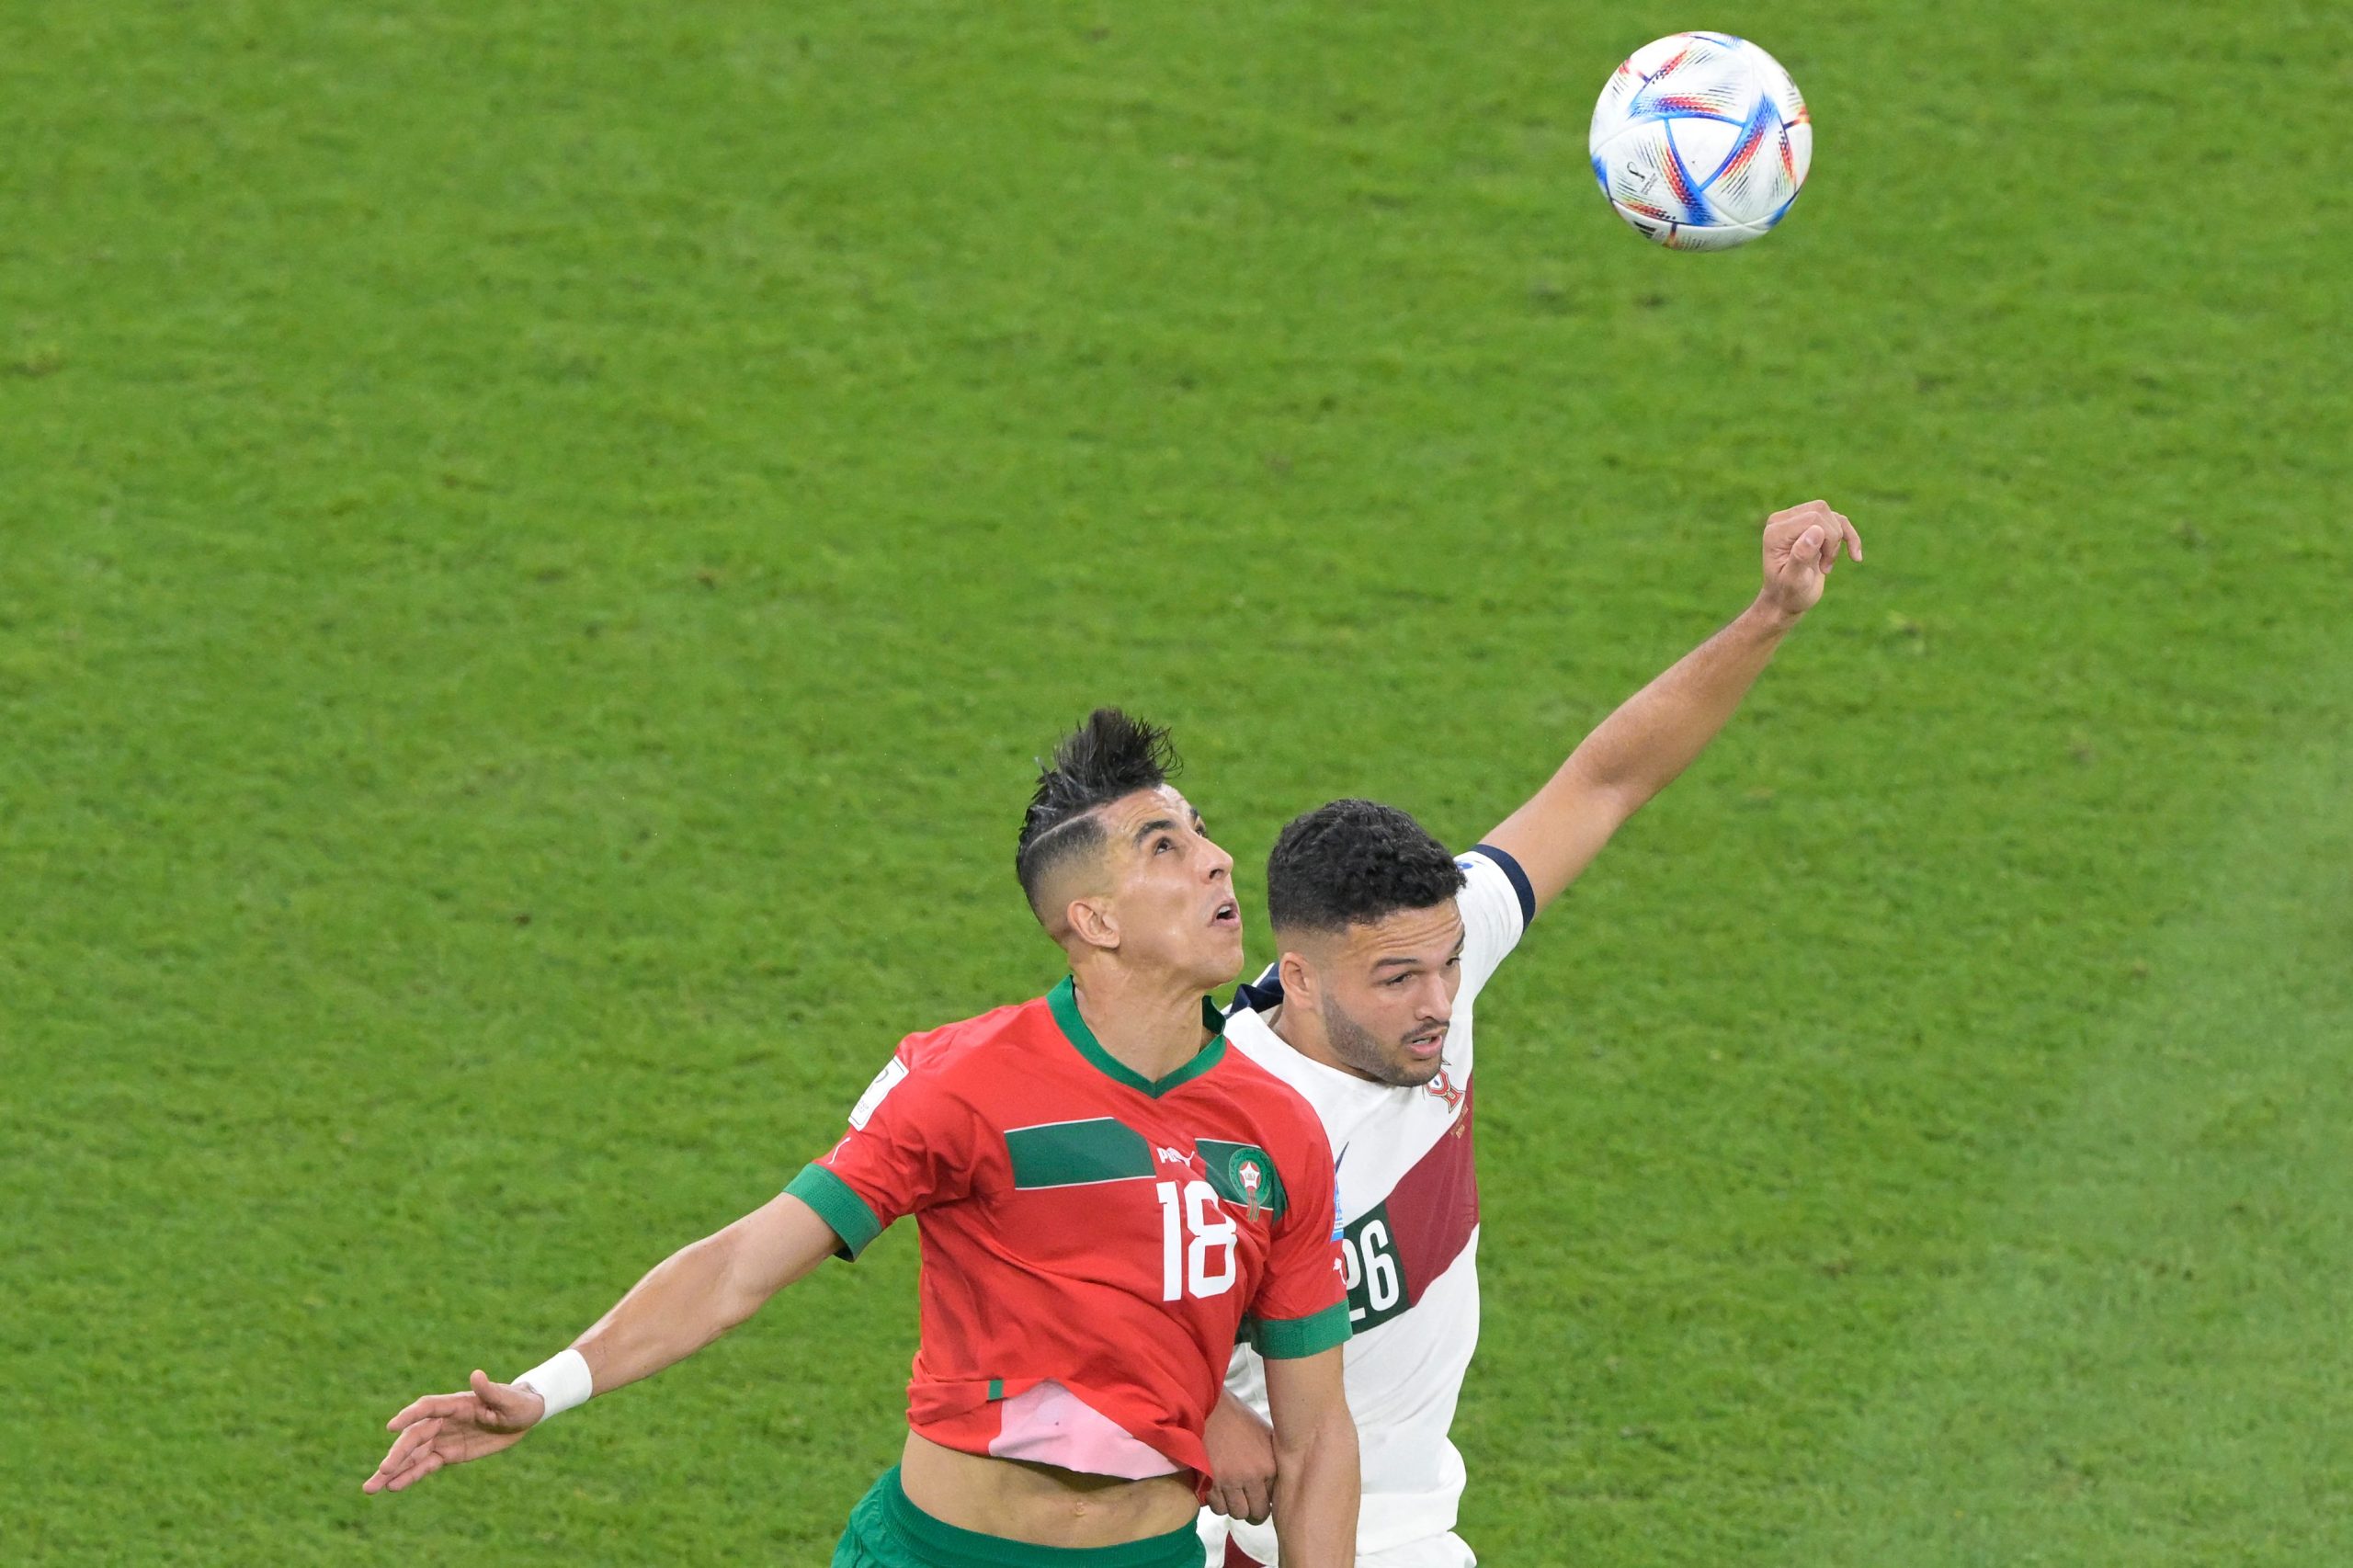 Morocco's Jawad El Yamiq and Portugal's Goncalo Ramos jump for a header.